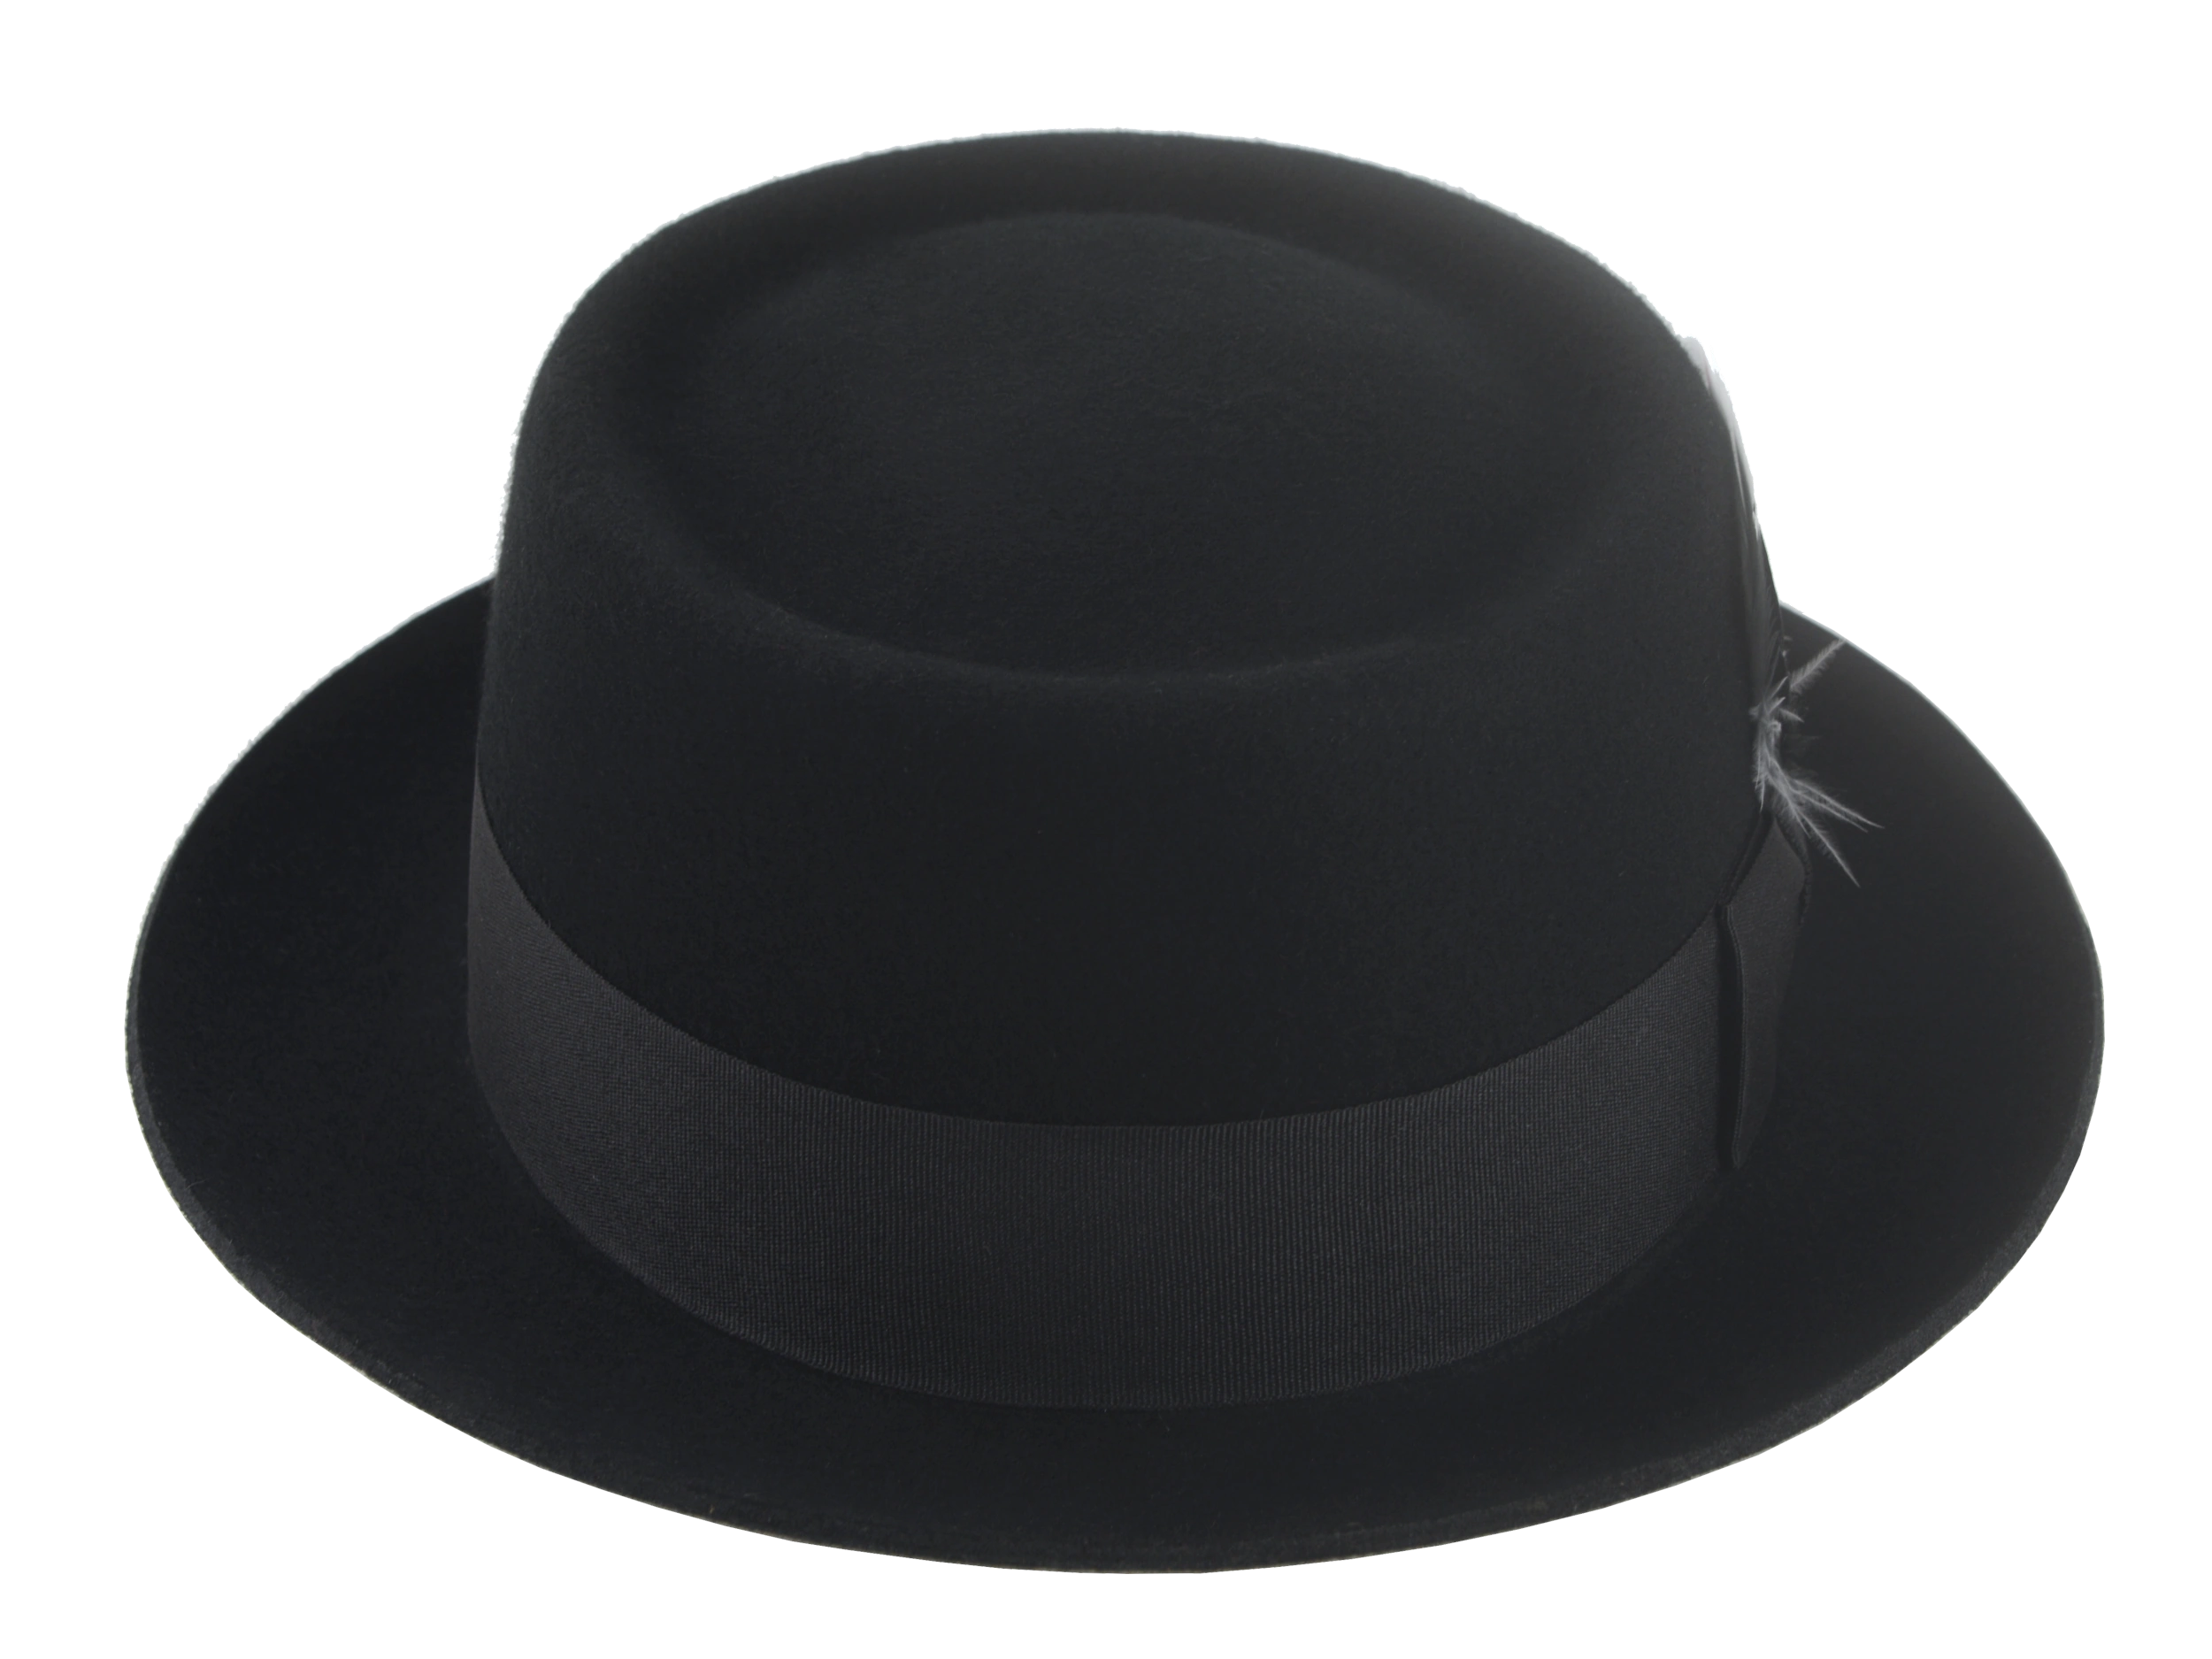 The Jazzist - Premium Wool Felt Porkpie Fedora For Men or Women with Feather in Black White and Red Color | Agnoulita Quality Custom Hats 6